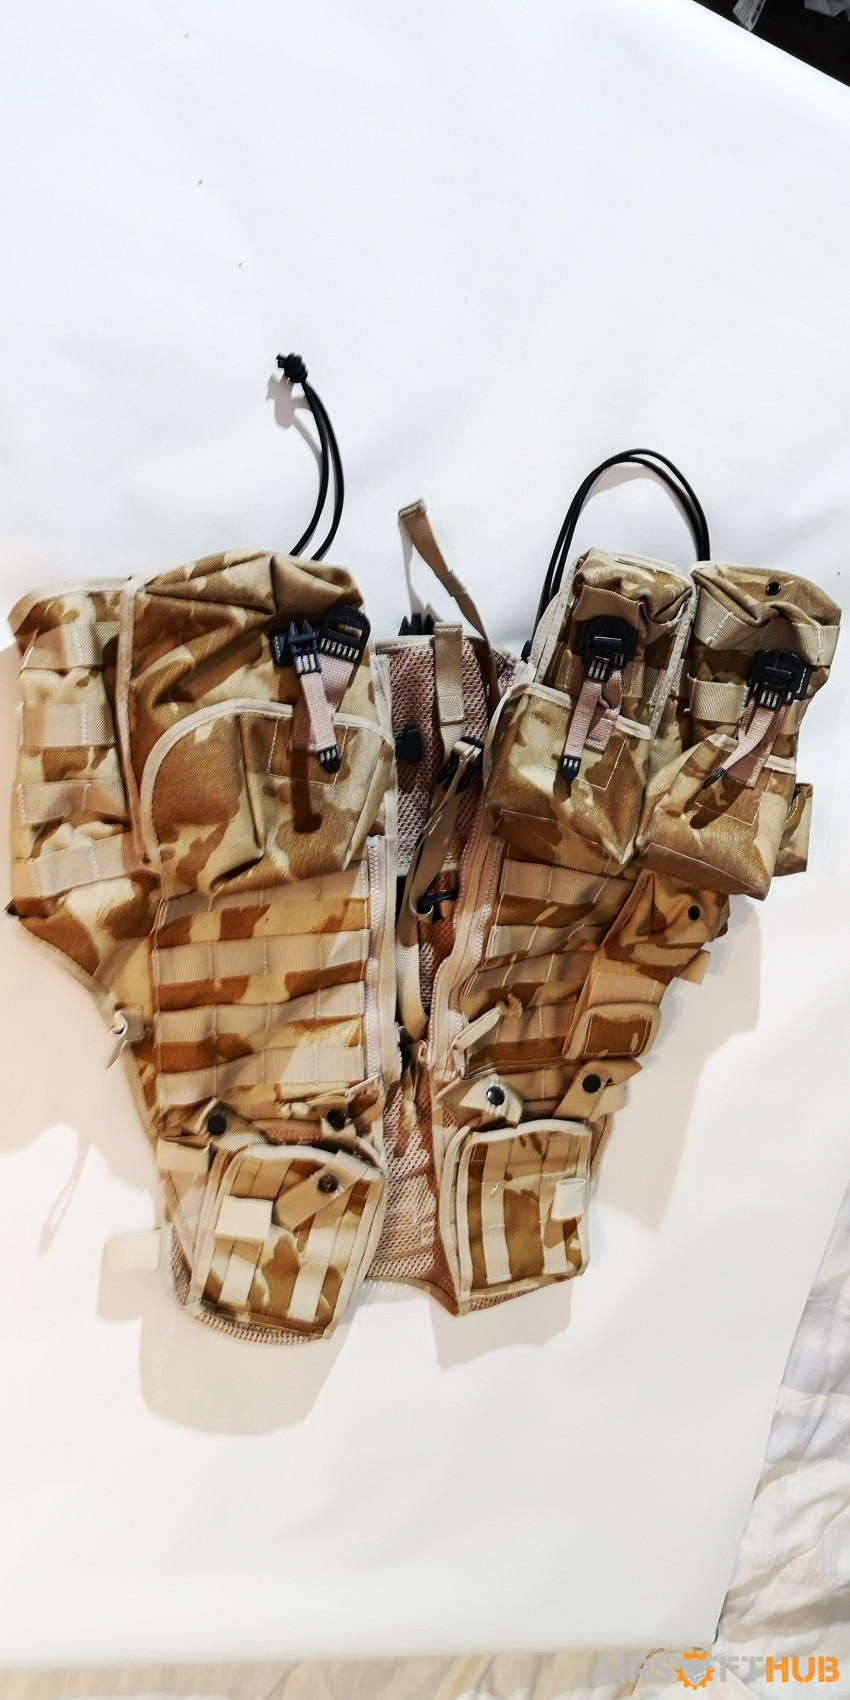 Various clothing/vests - Used airsoft equipment